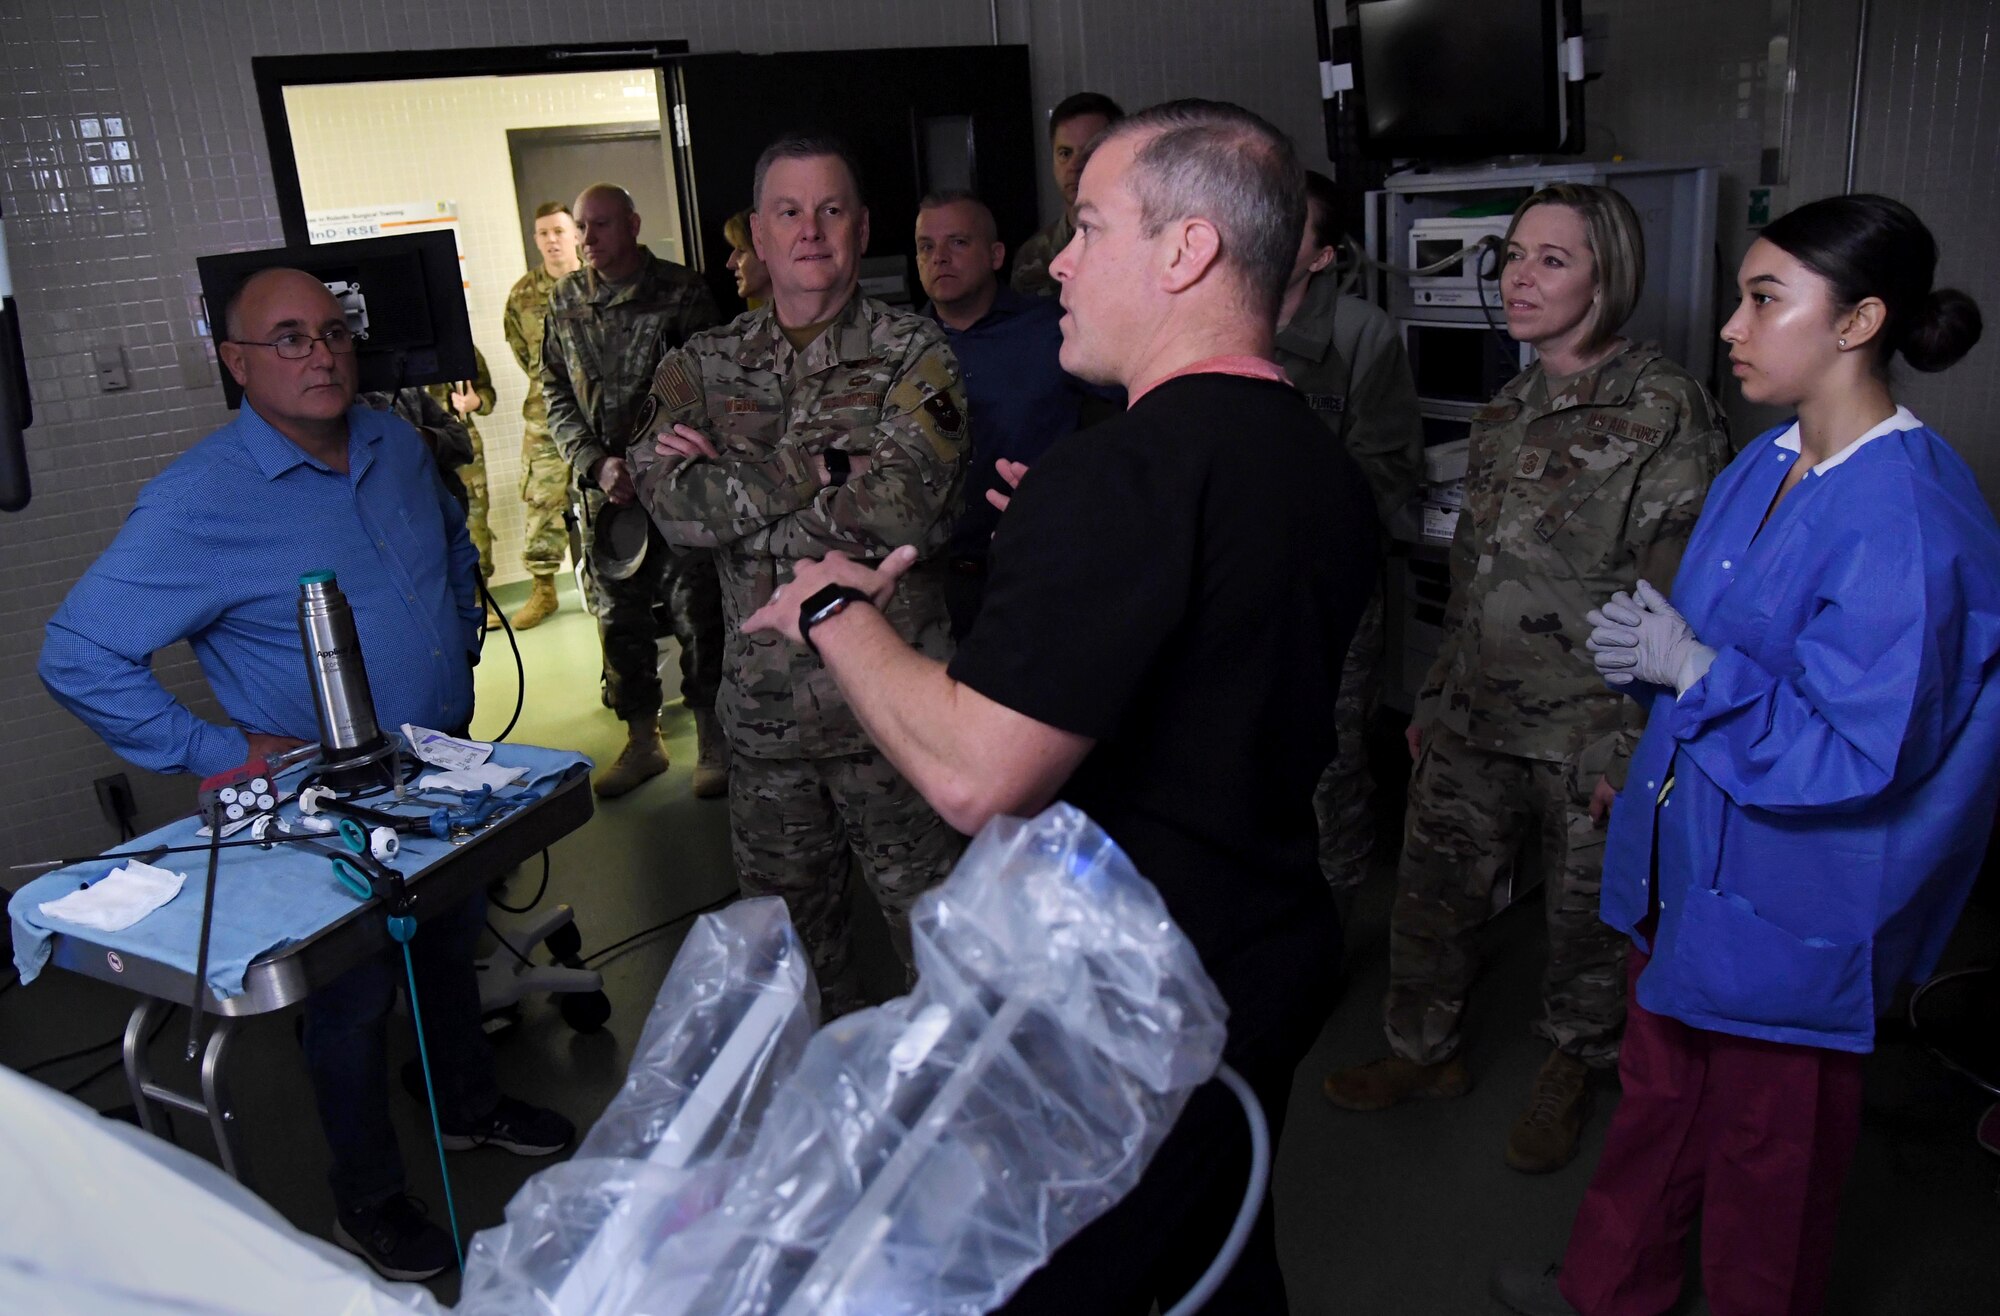 Greg Street, Intuitive Surgical instructor, briefs on the robotics surgery training course to Lt. Gen. Brad Webb, commander of Air Education and Training Command, and Chief Master Sgt. Julie Gudgel, command chief of AETC, during an immersion tour inside the Clinical Research Lab at Keesler Air Force Base, Mississippi, Jan. 31, 2020. The AETC command team visited Keesler in order to become more familiar with the mission capabilities of the 81st Training Wing and to view the paradigm shift occurring in the training environment within the 81st Training Group. (U.S. Air Force photo by Kemberly Groue)